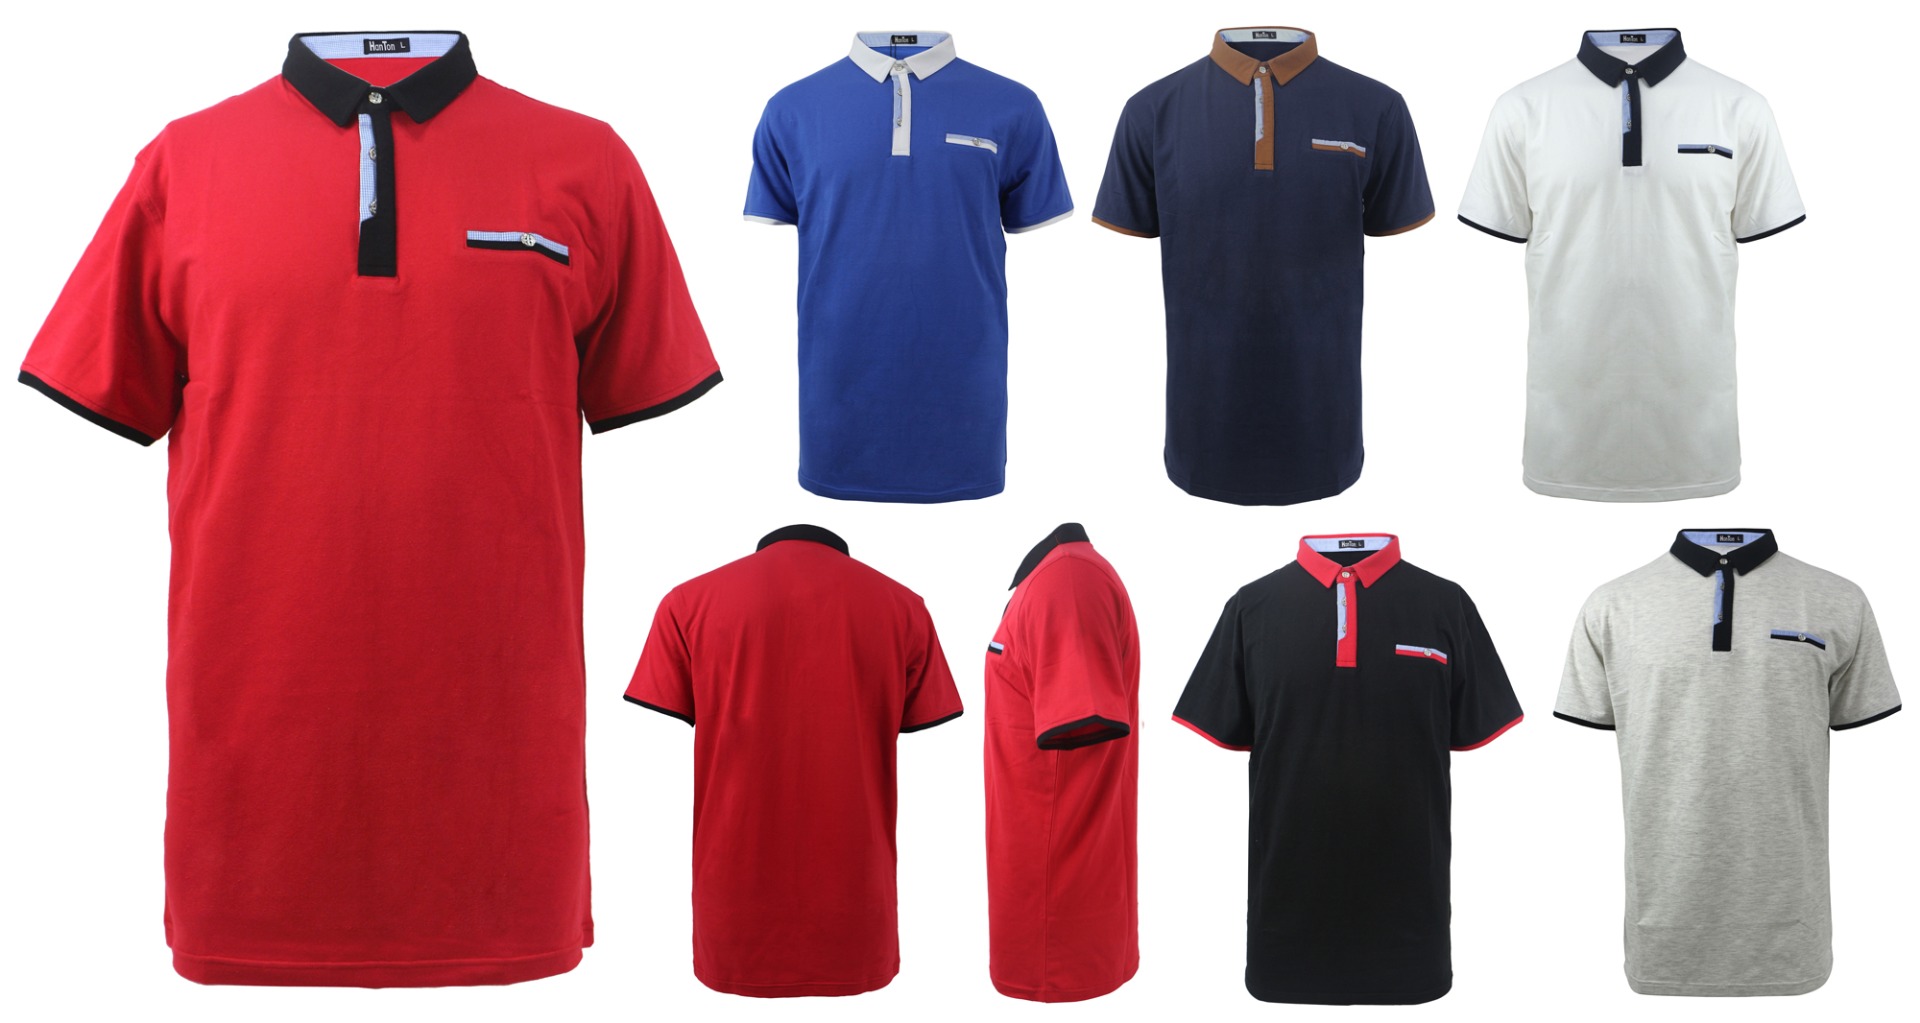 Men's Active Polo SHIRTs - Solid Colors - Sizes Small-2X